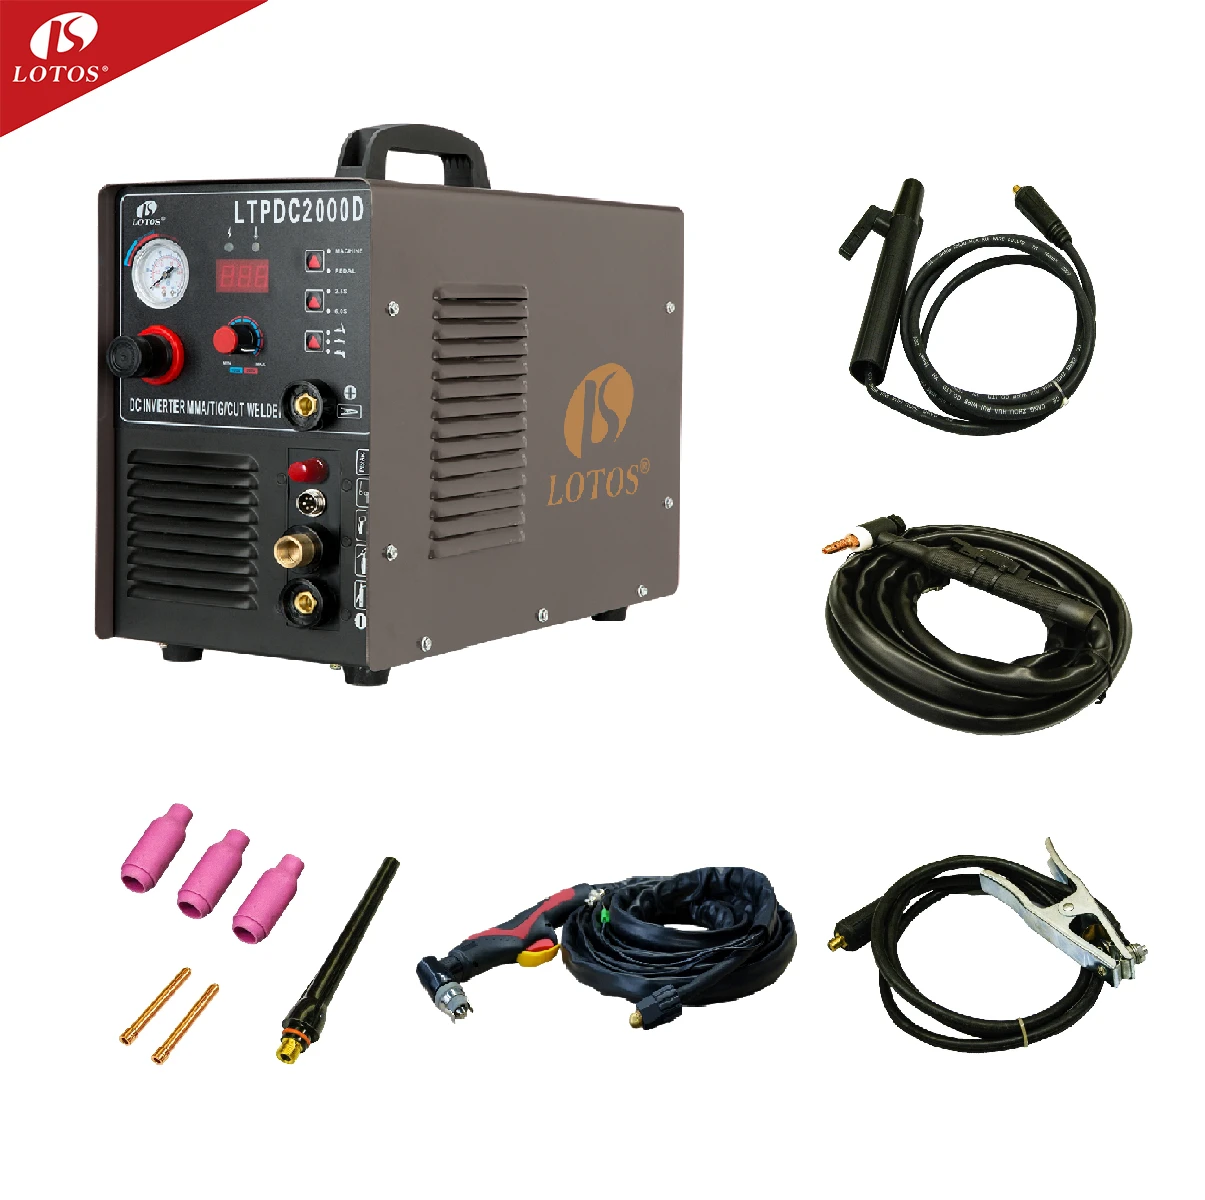 Lotos ltpdc2000d gas tig arc welding machine 220v usd  plasma cutter combo 3 in 1 welder price for thanksgiving sale gift